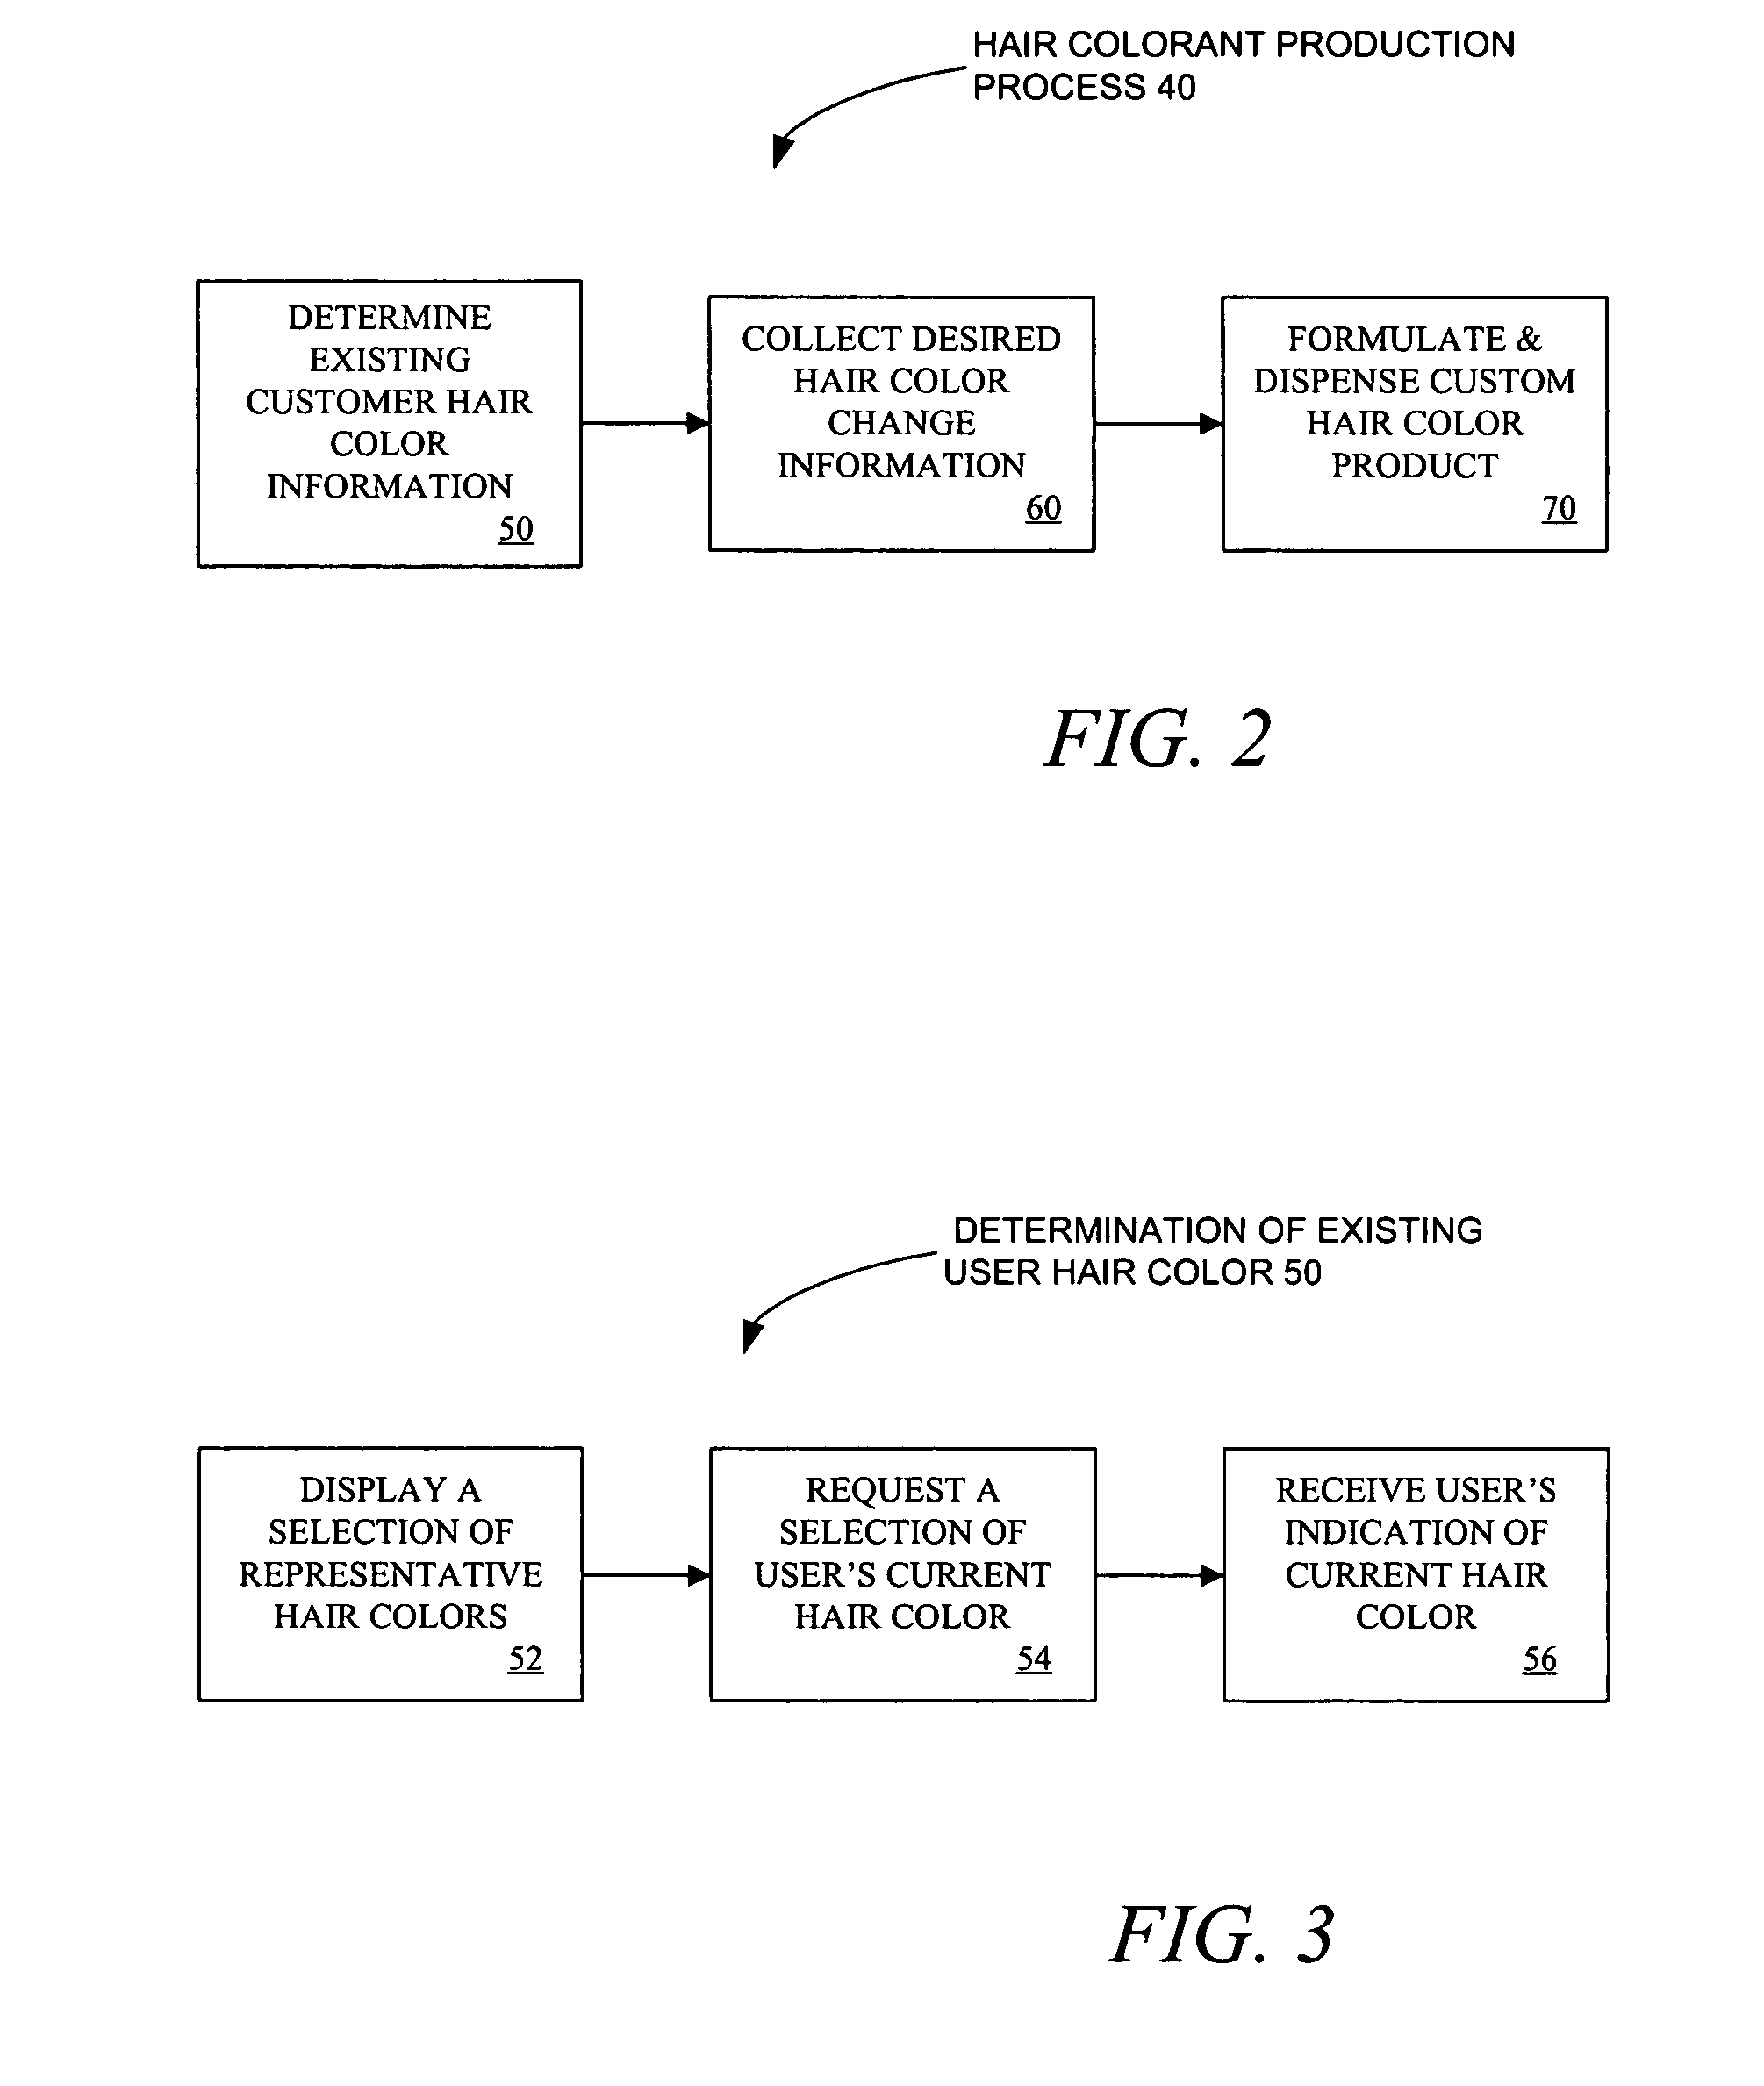 Apparatus and methods for selecting, formulating, mixing & dispensing custom hair coloring products for a user